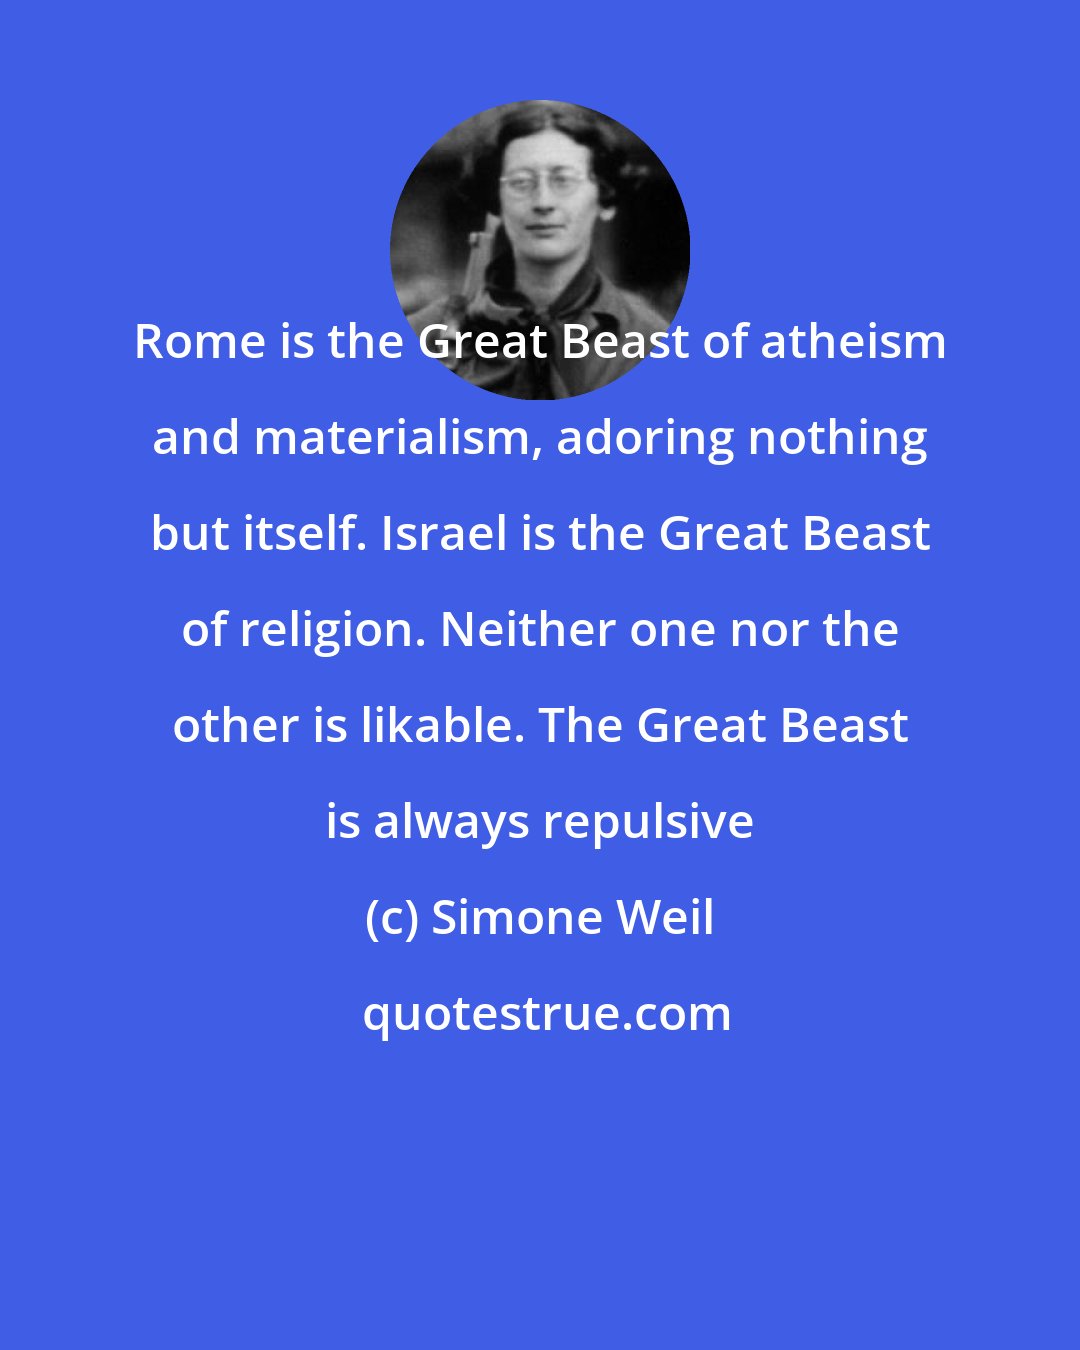 Simone Weil: Rome is the Great Beast of atheism and materialism, adoring nothing but itself. Israel is the Great Beast of religion. Neither one nor the other is likable. The Great Beast is always repulsive